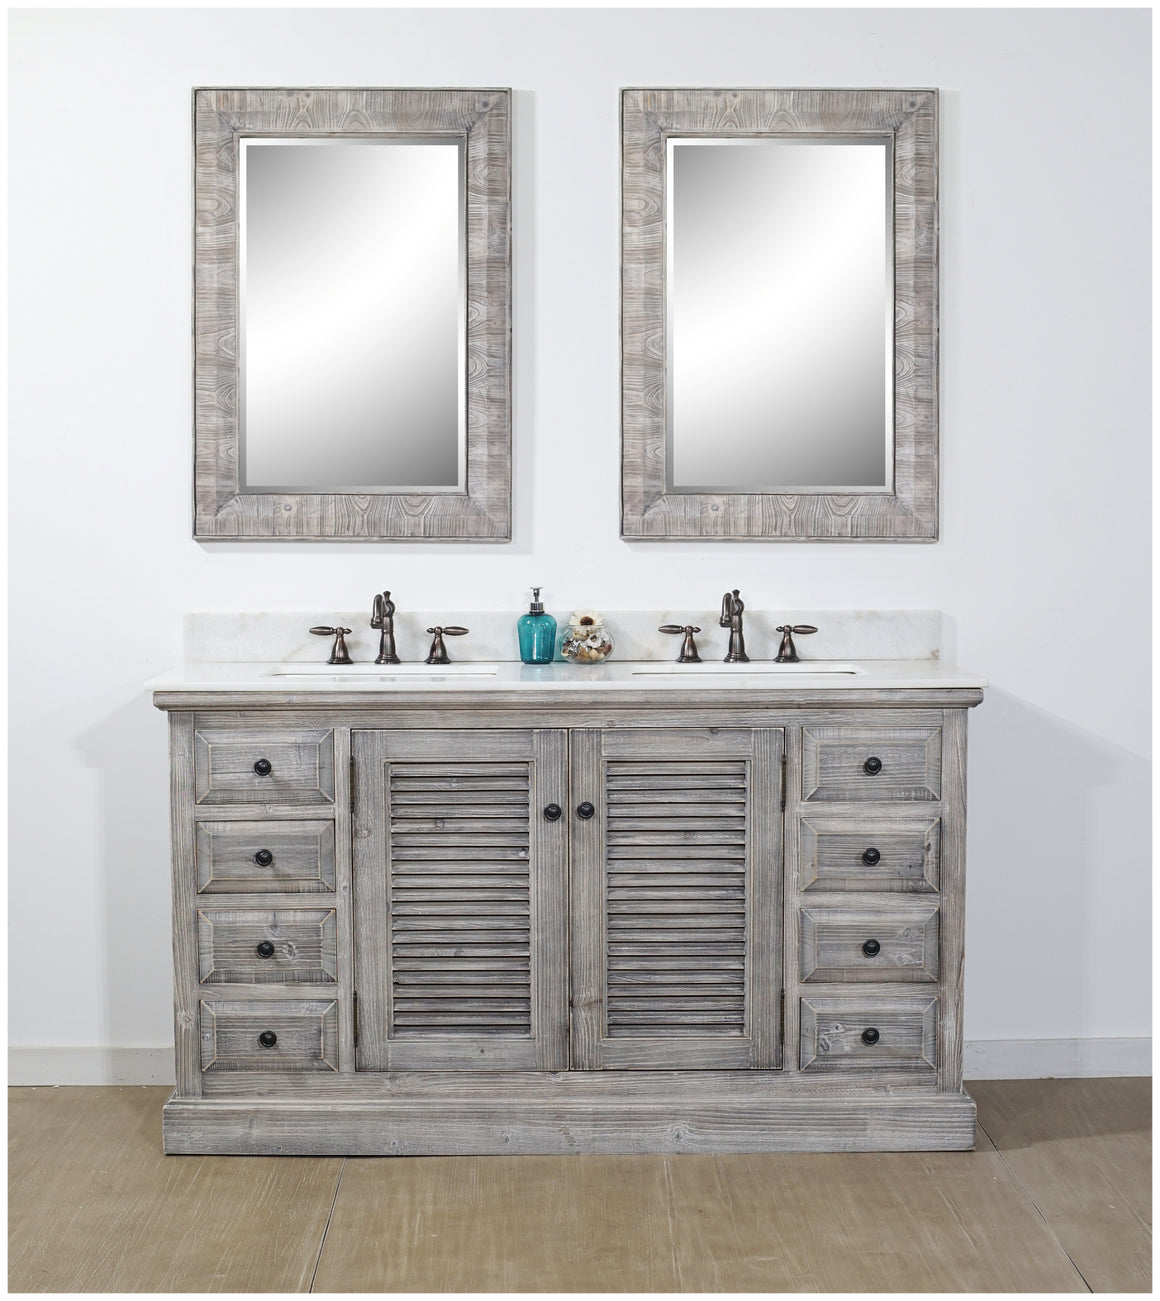 60" RUSTIC SOLID FIR DOUBLE SINKS VANITY IN GREY DRIFTWOOD WITH ARCTIC PEARL QUARTZ MARBLE TOP-NO FAUCET